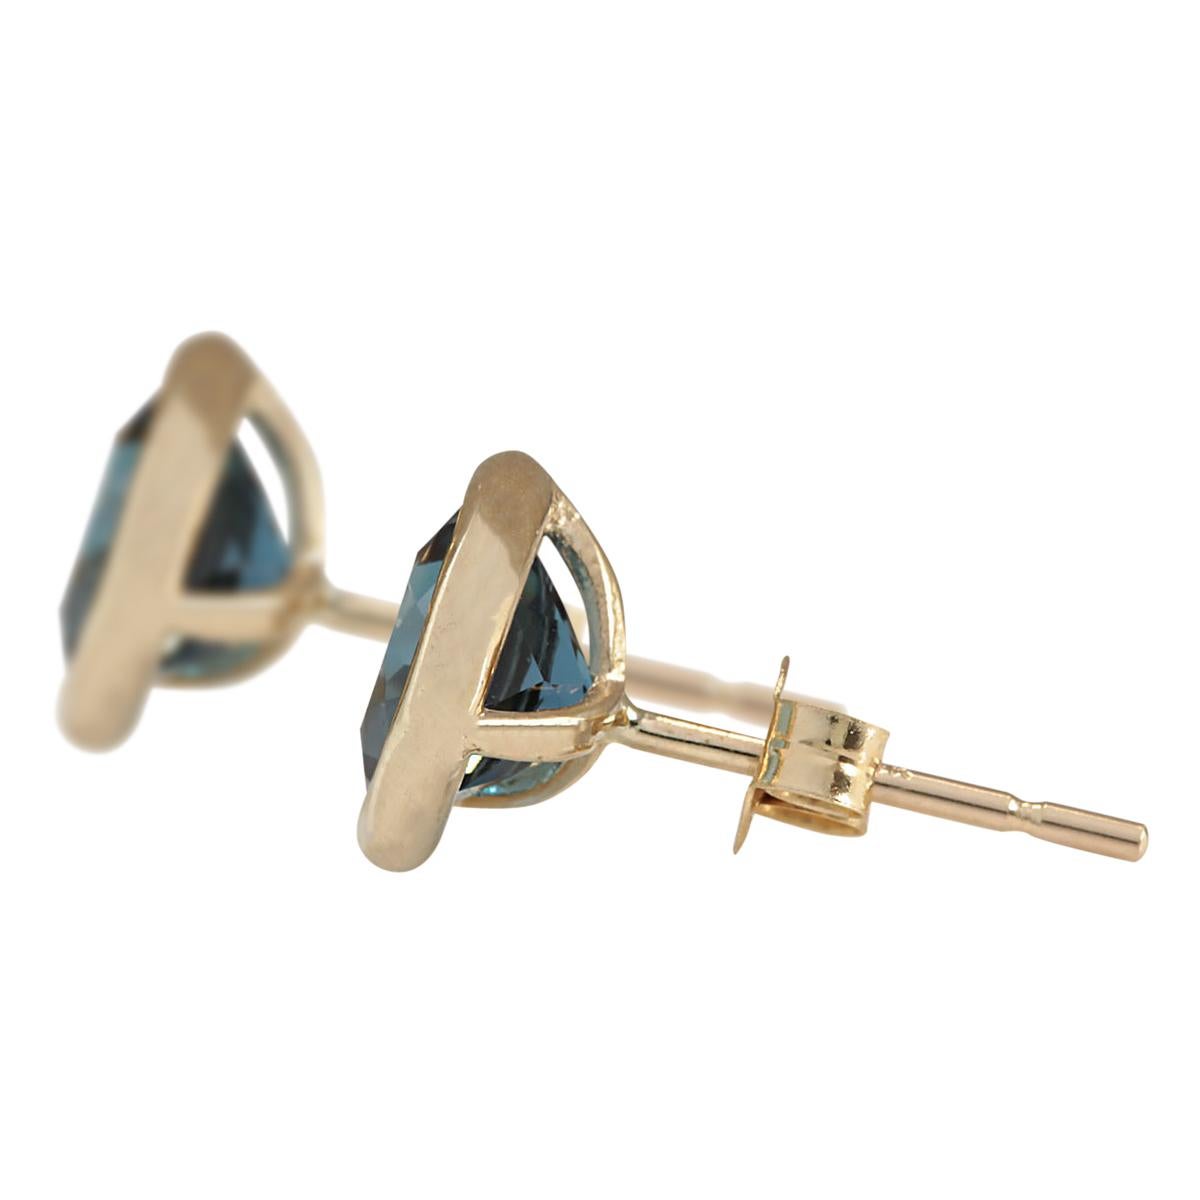 Stamped: 14K Yellow Gold
Total Earrings Weight: 1.8 Grams
Total Natural Topaz Weight is 3.00 Carat (Measures: 7.00x7.00 mm)
Color: London Blue
Face Measures: 8.80x8.80 mm
Sku: [703320W]